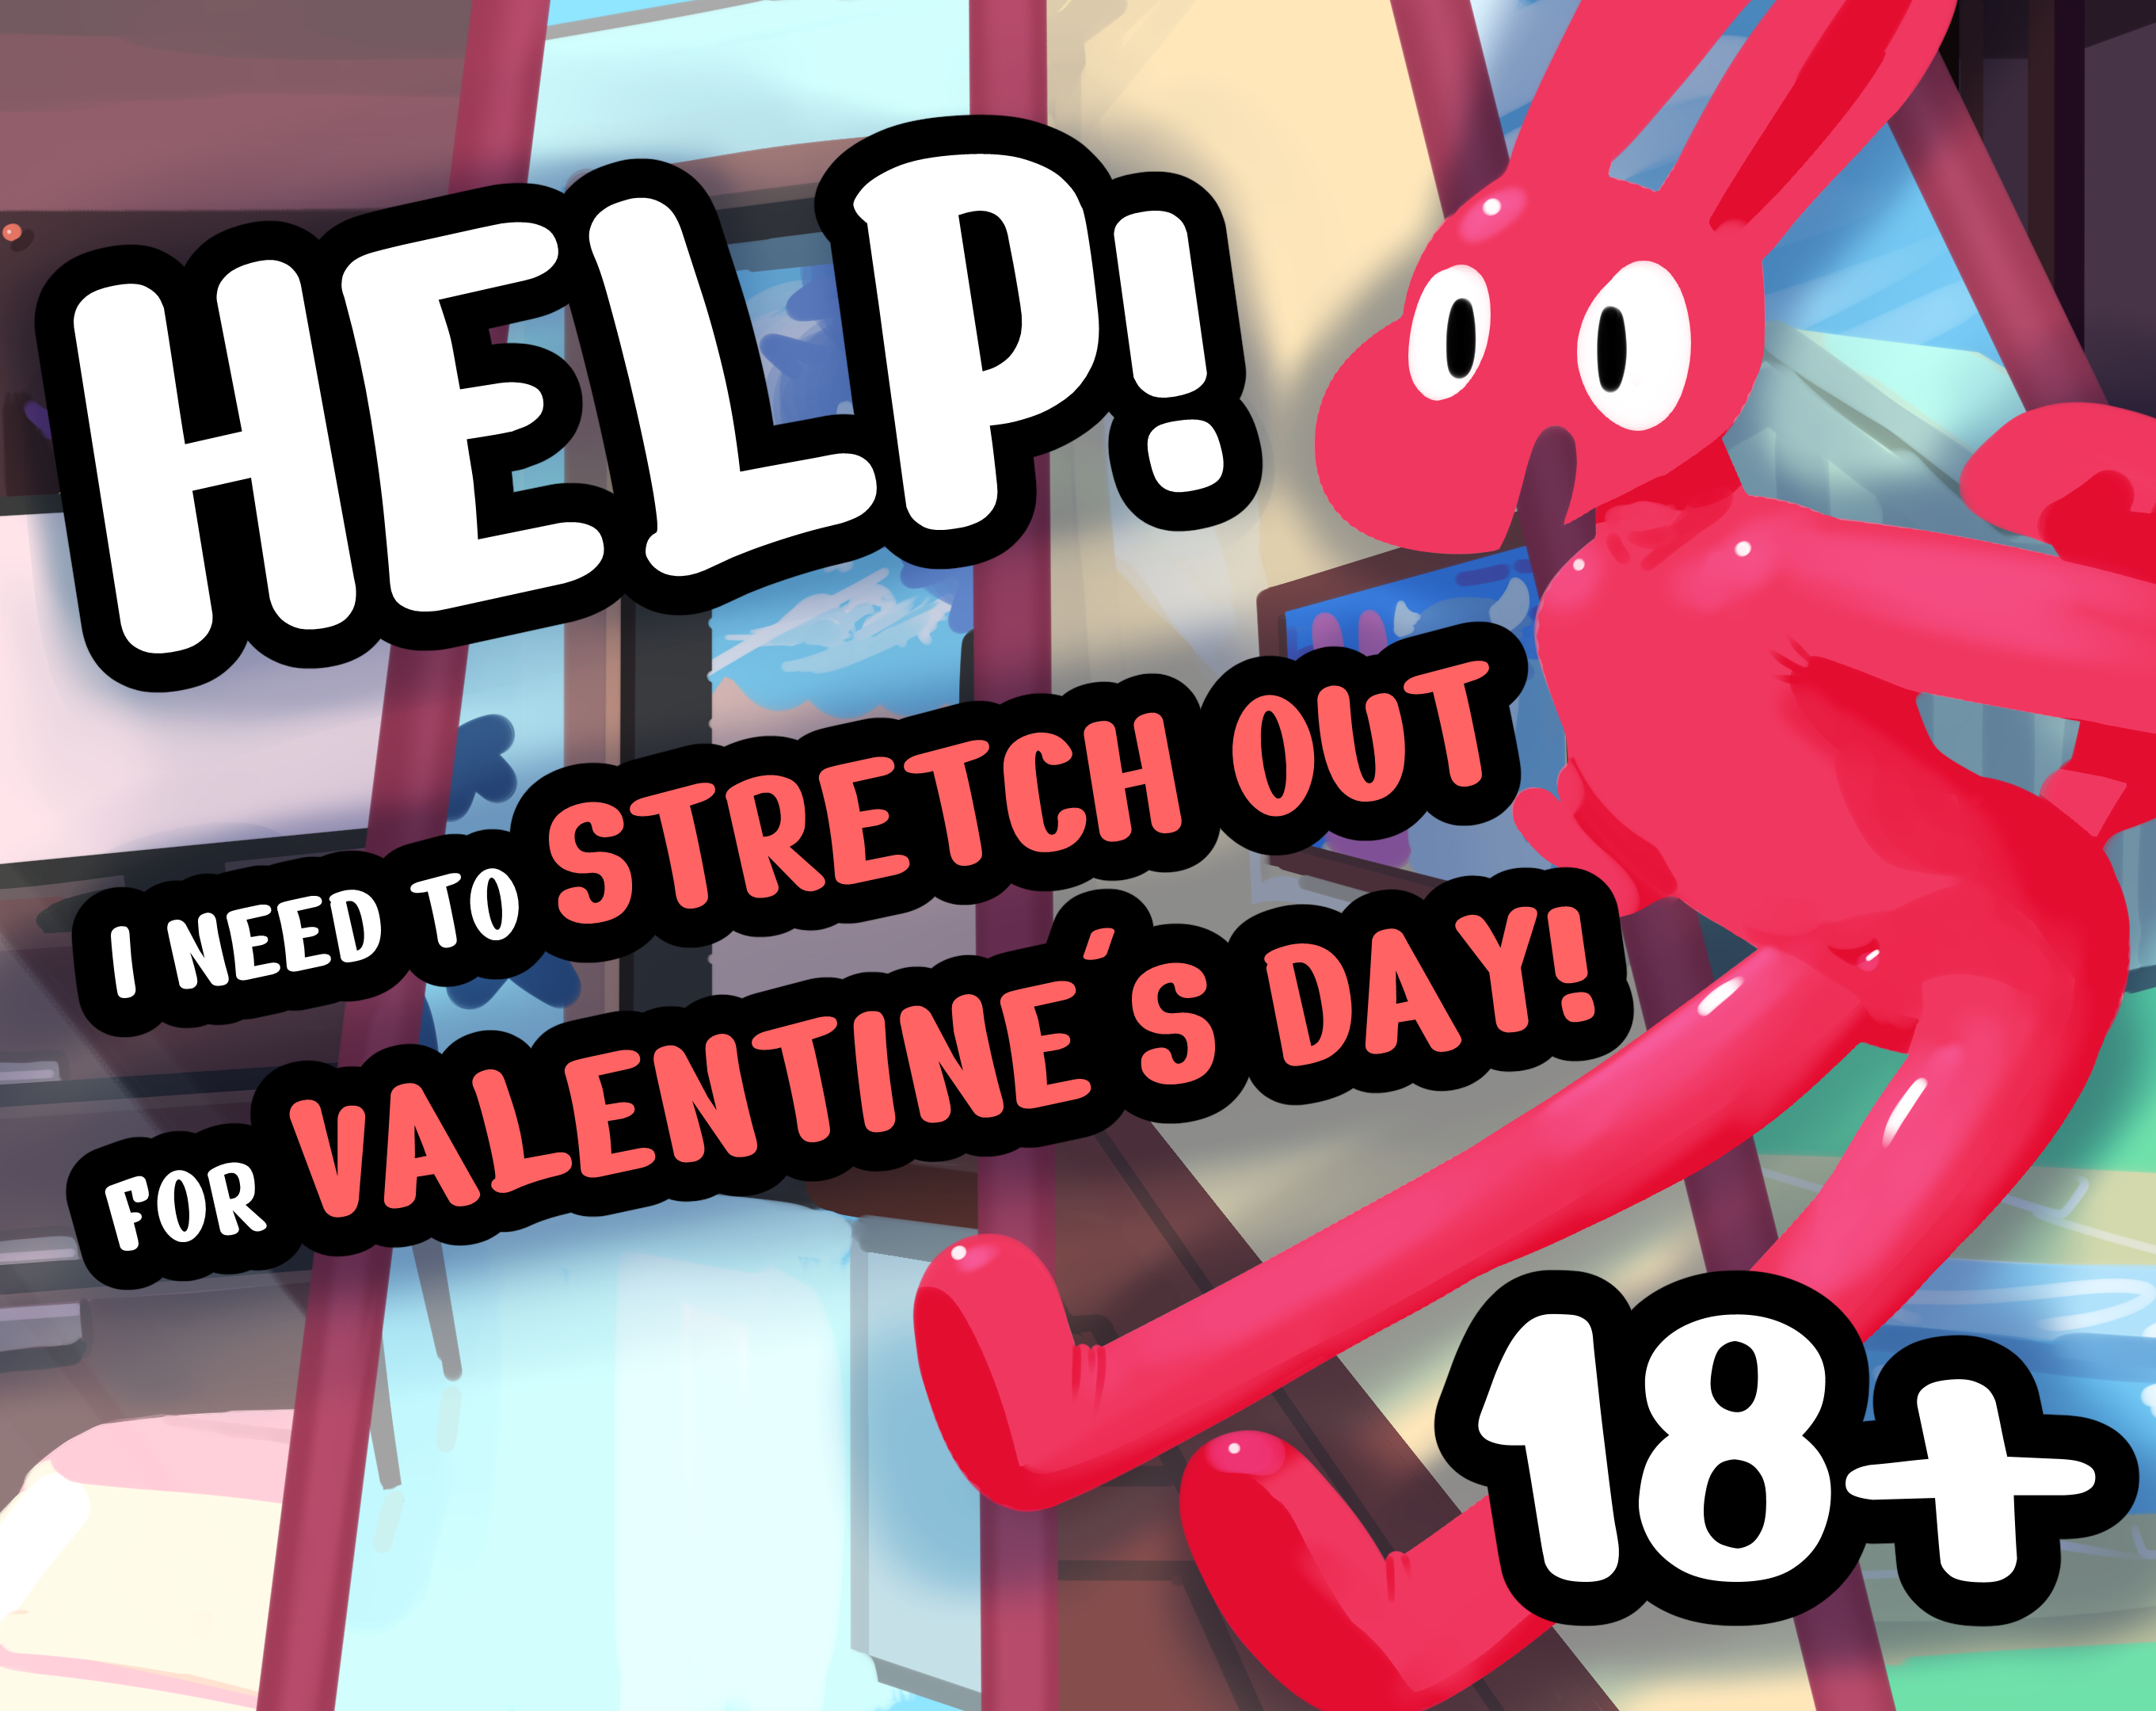 Help! I Need to Stretch Out For Valentines Day! by pastrygames for  Strawberry Jam 5 